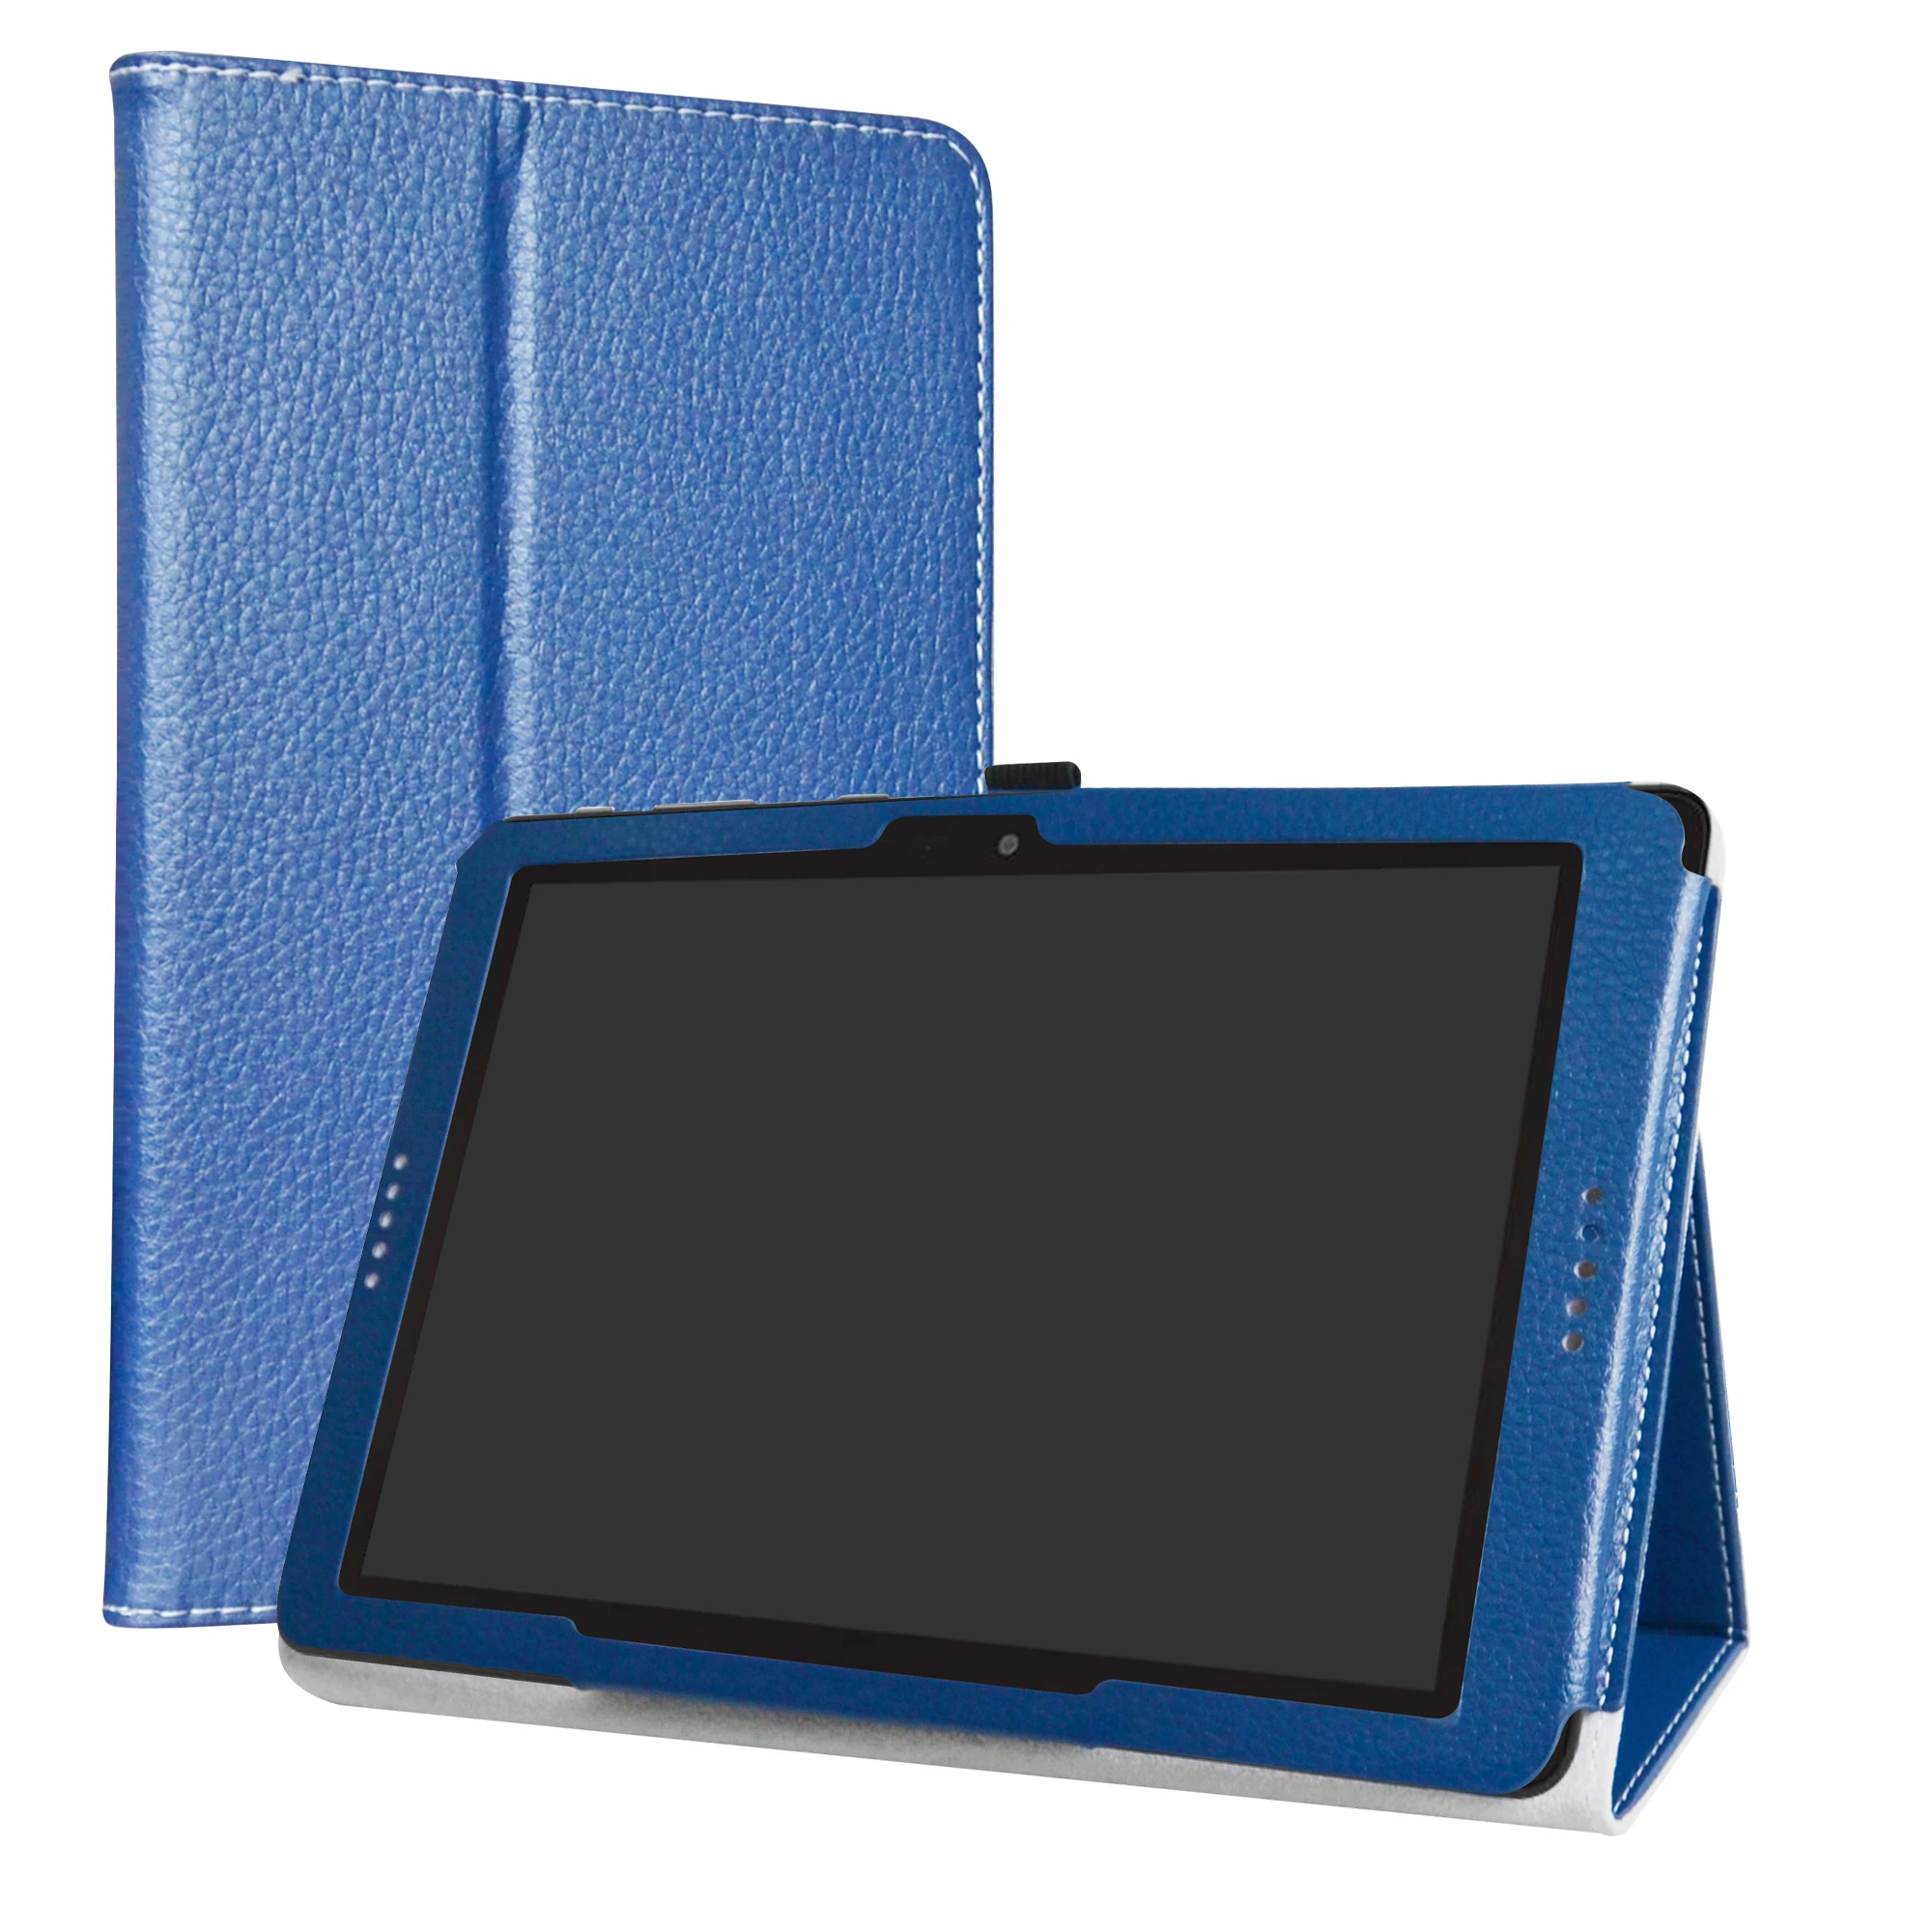 Case For 10" AT&T Primetime Tablet Folding Stand PU Leather Cover with Magnetic Closure